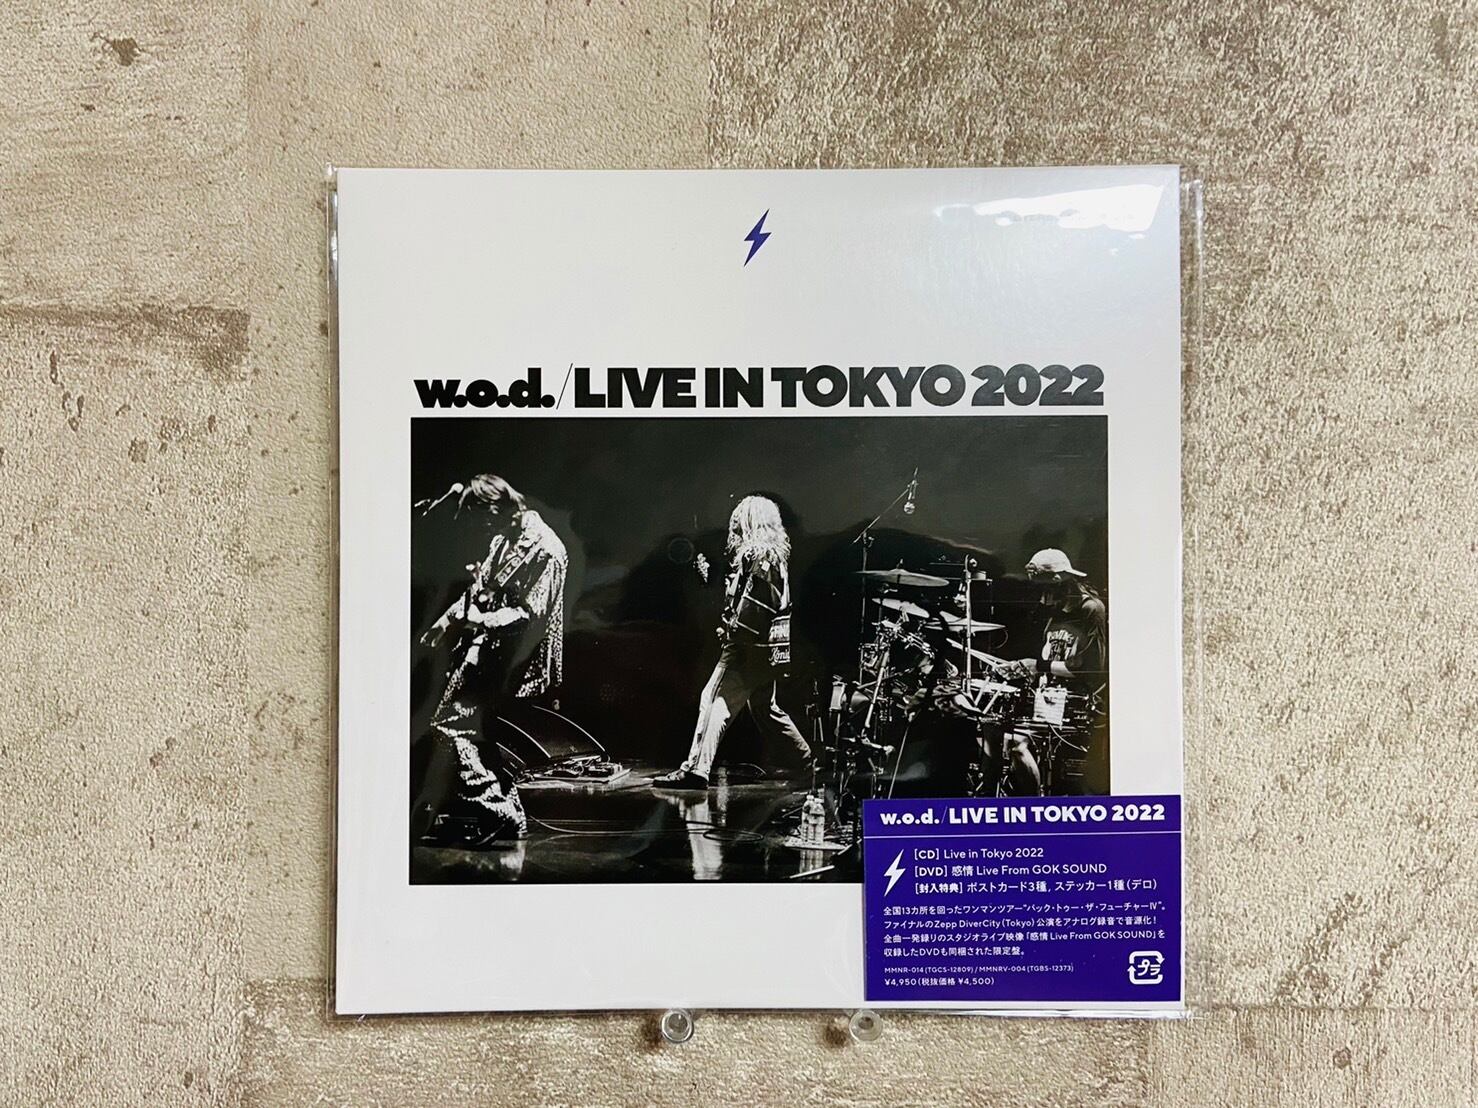 Live in Tokyo 2022